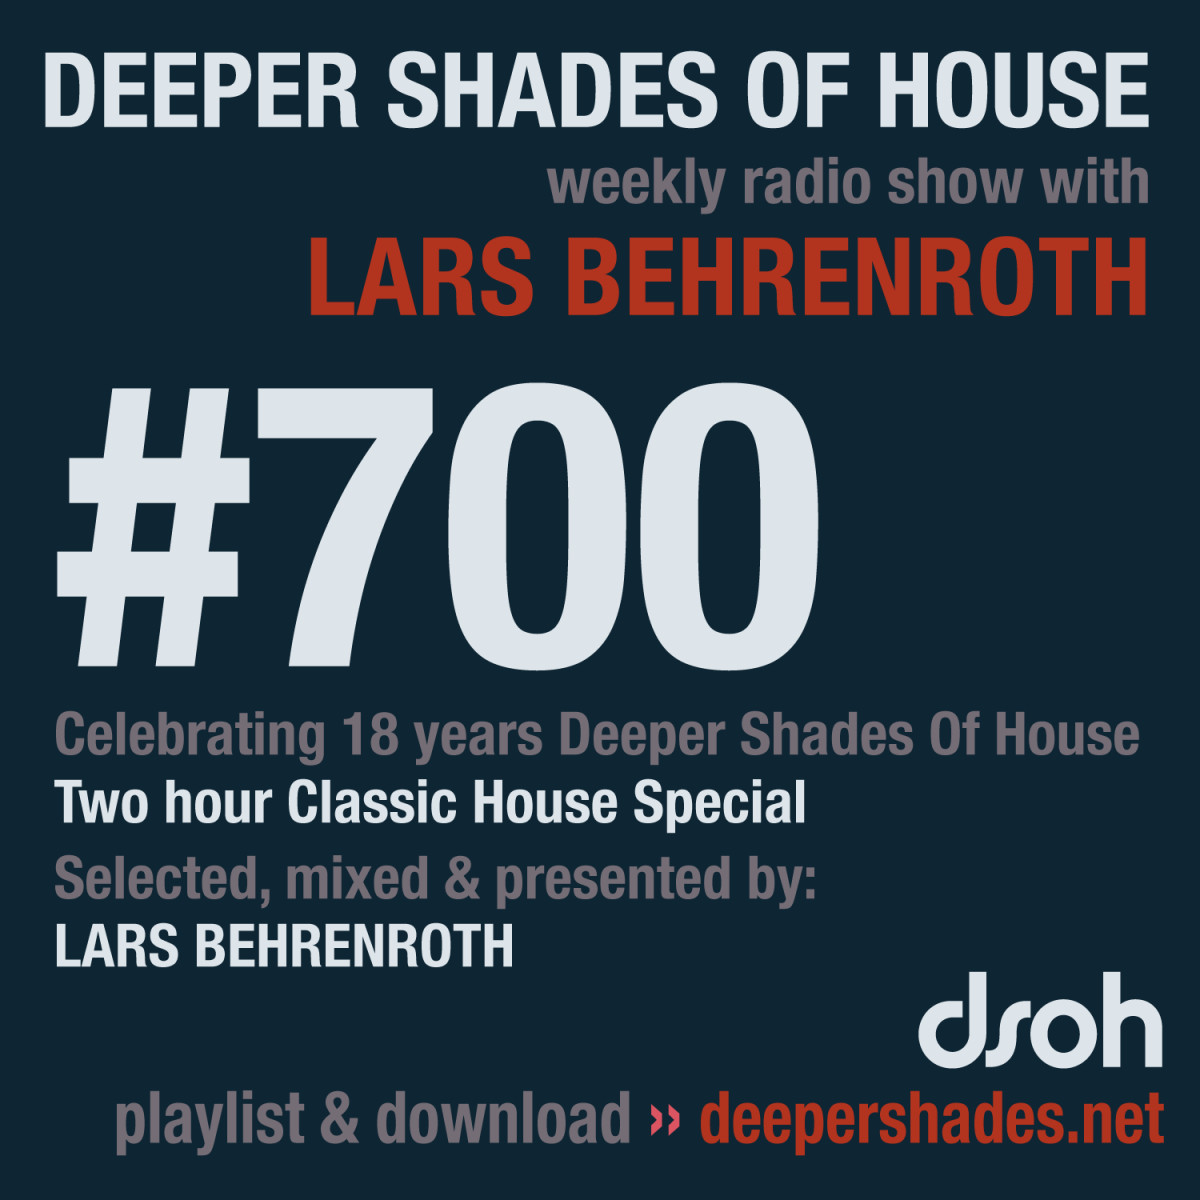 #nowplaying on radio.deepershades.net : mixed & presented by Lars Behrenroth - DSOH #700 - 2 hour Classic House Special #deephouse #livestream #dsoh #housemusic